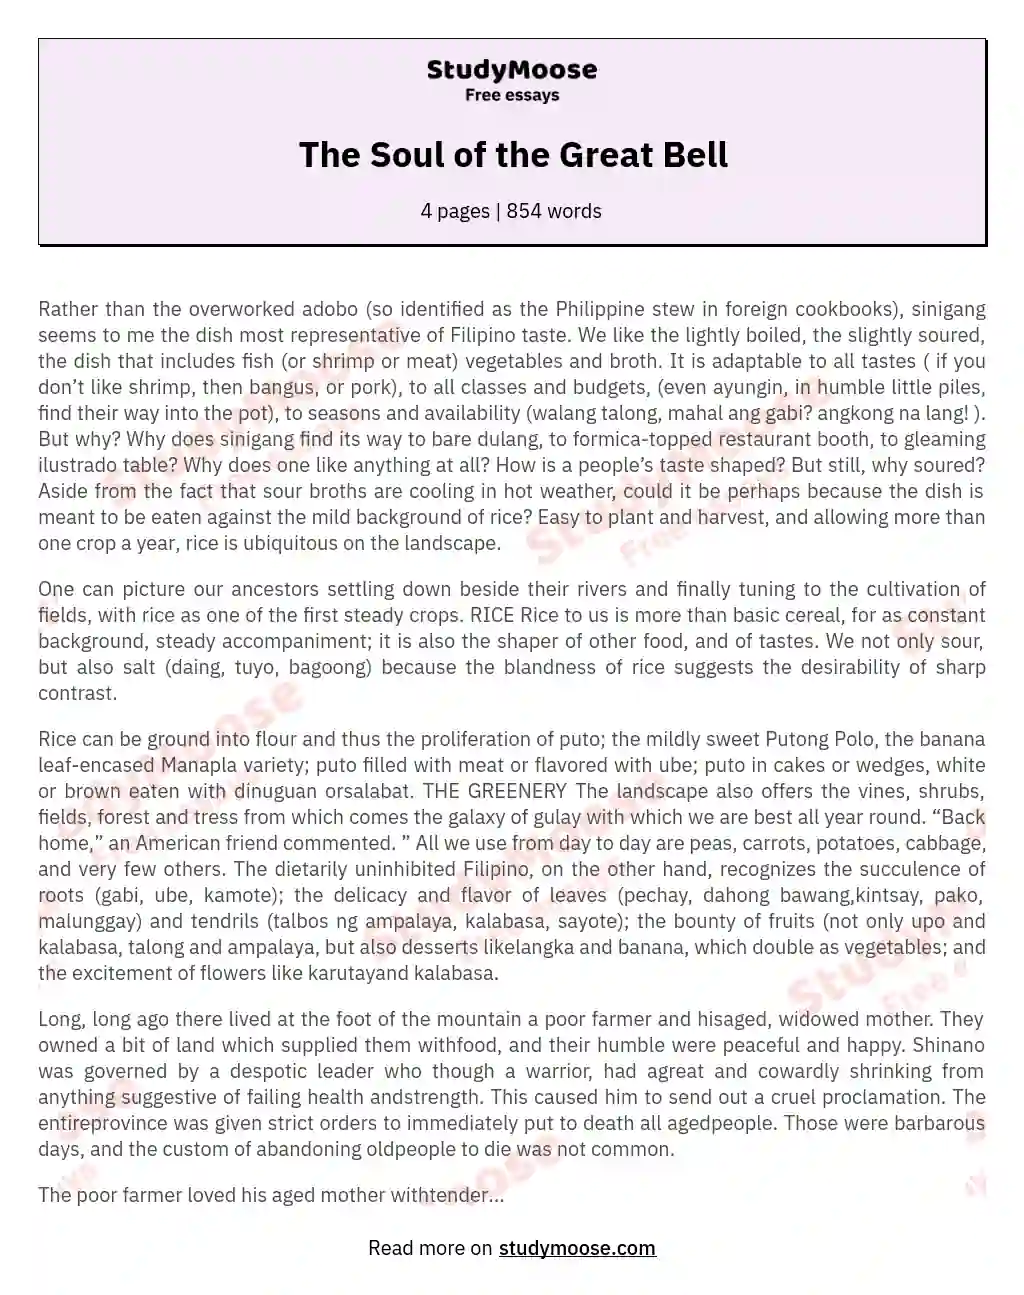 The Soul of the Great Bell essay